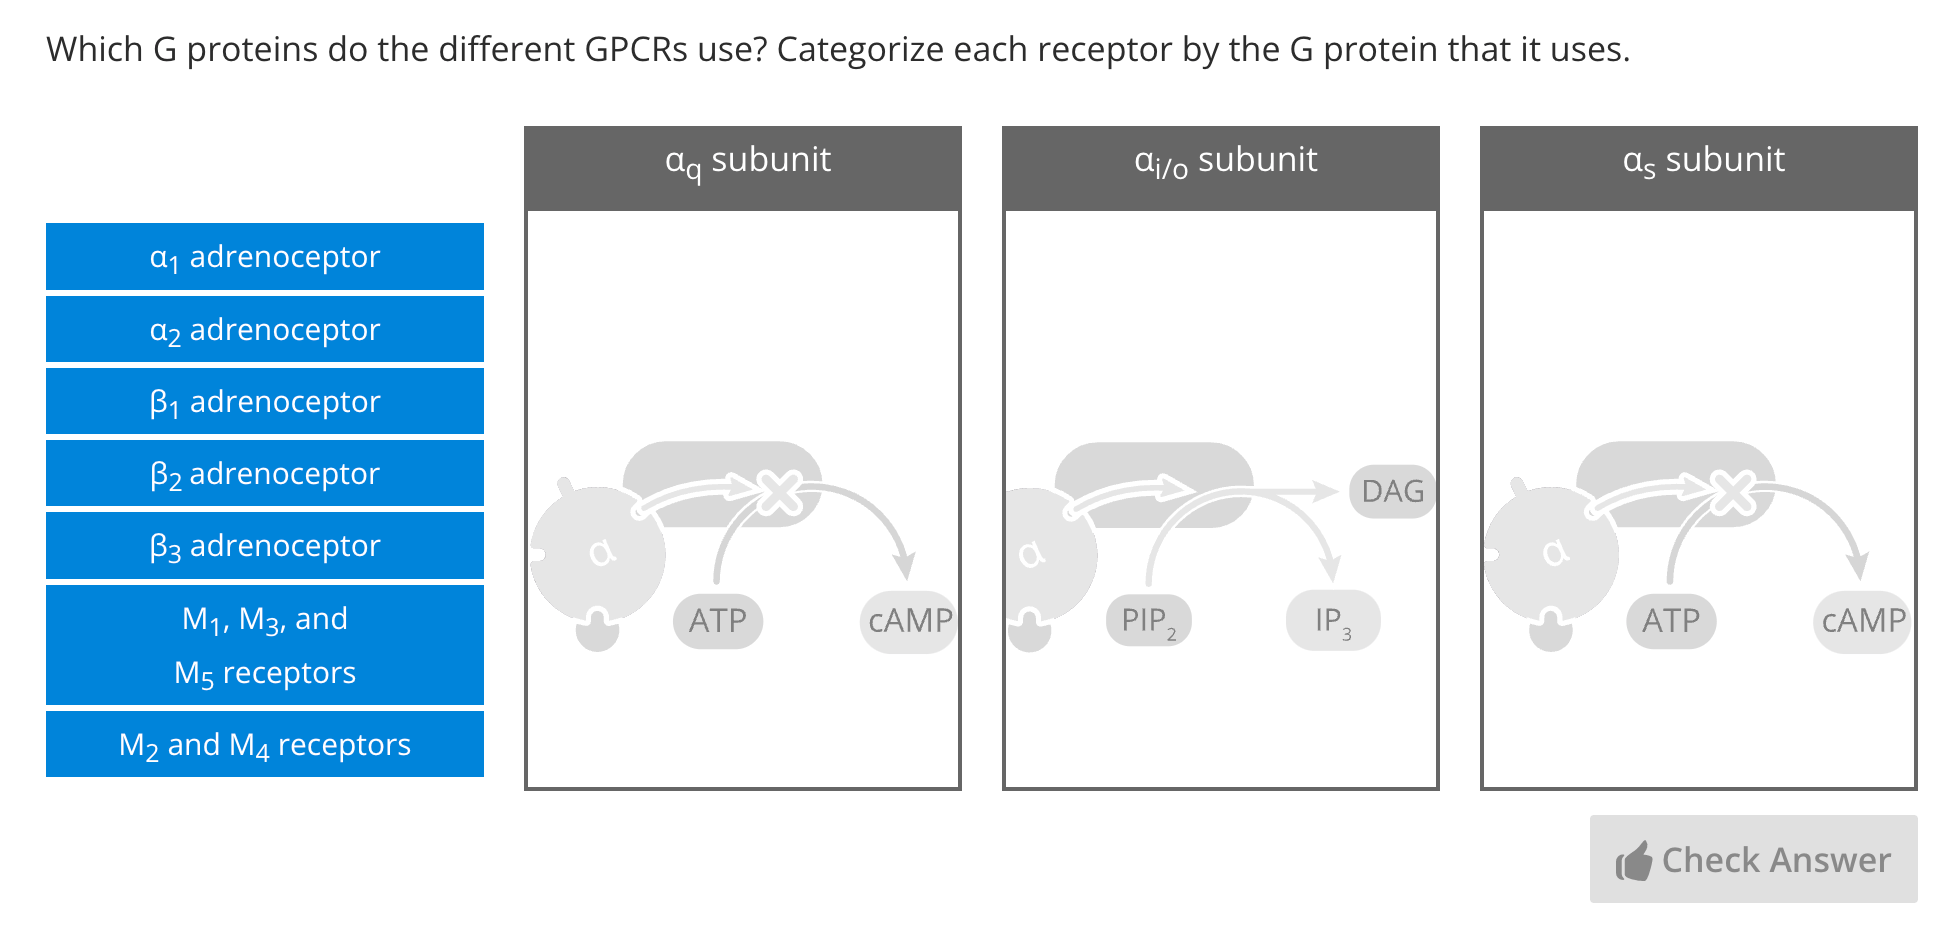 A drag-and-drop question in Lt that has students match G-protein-coupled receptors to G proteins.